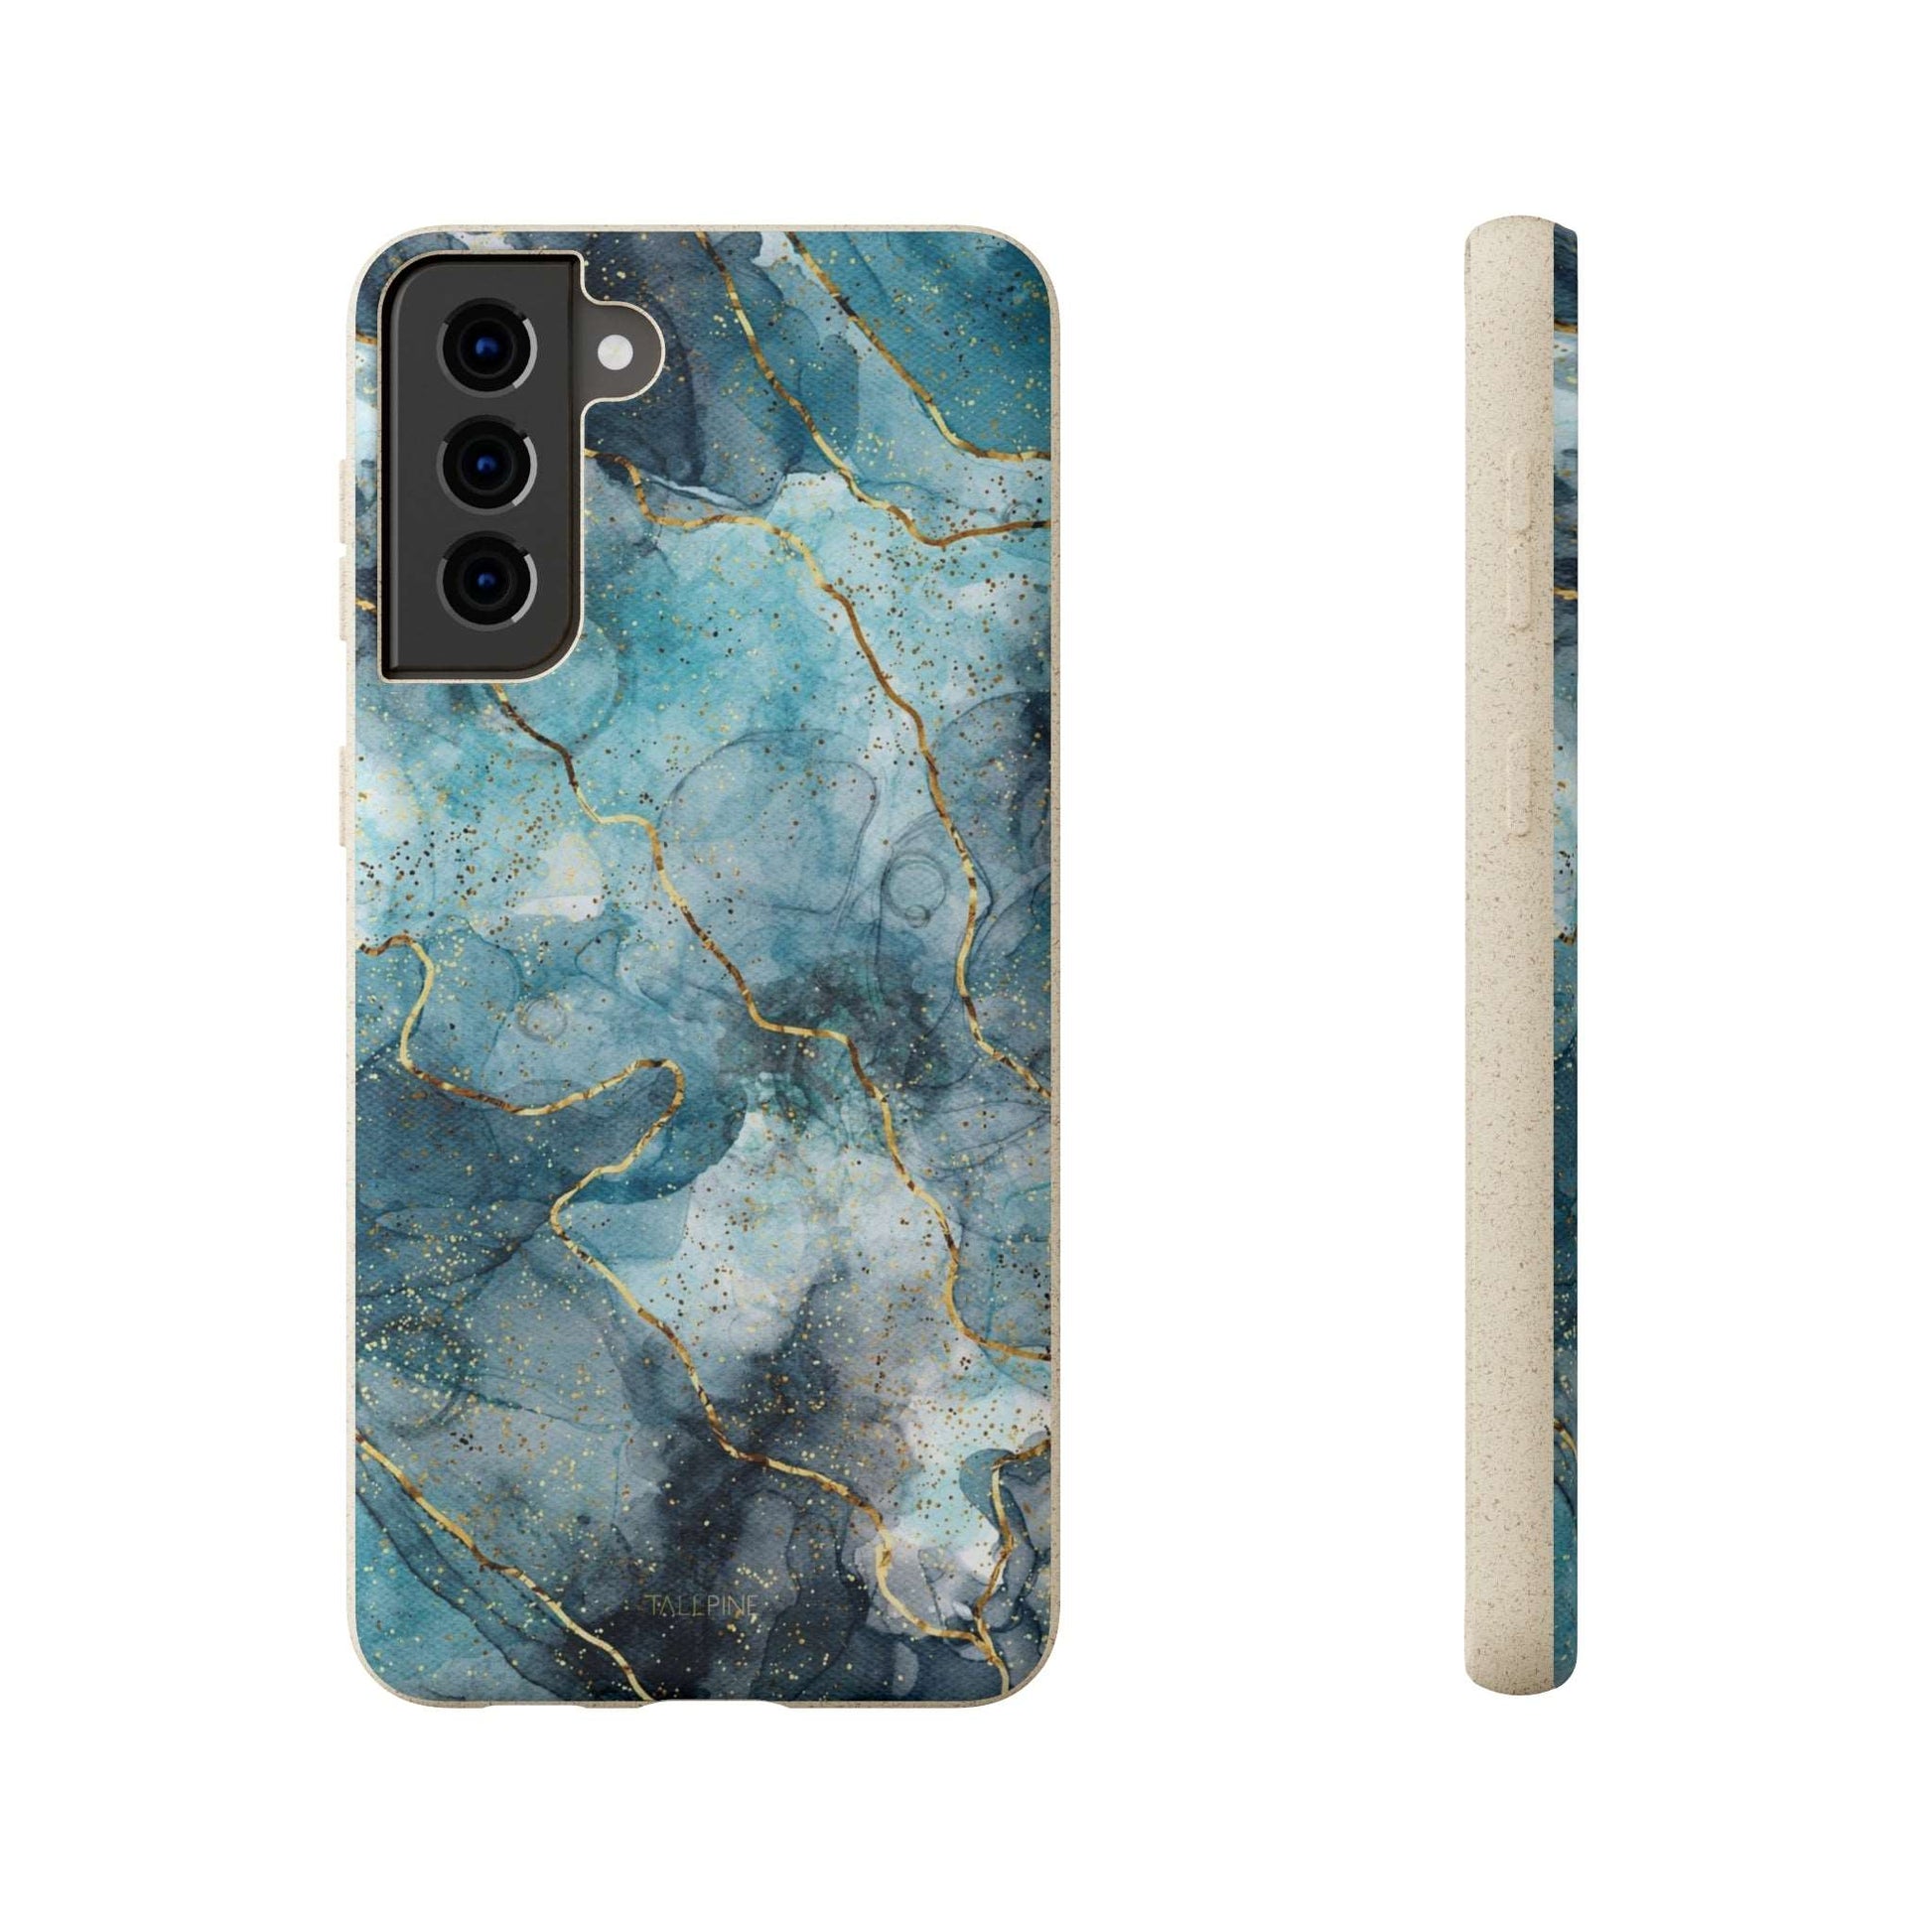 Sapphire Marble - Eco Case Samsung Galaxy S21 Plus - Tallpine Cases | Sustainable and Eco-Friendly - Abstract Blue Marble